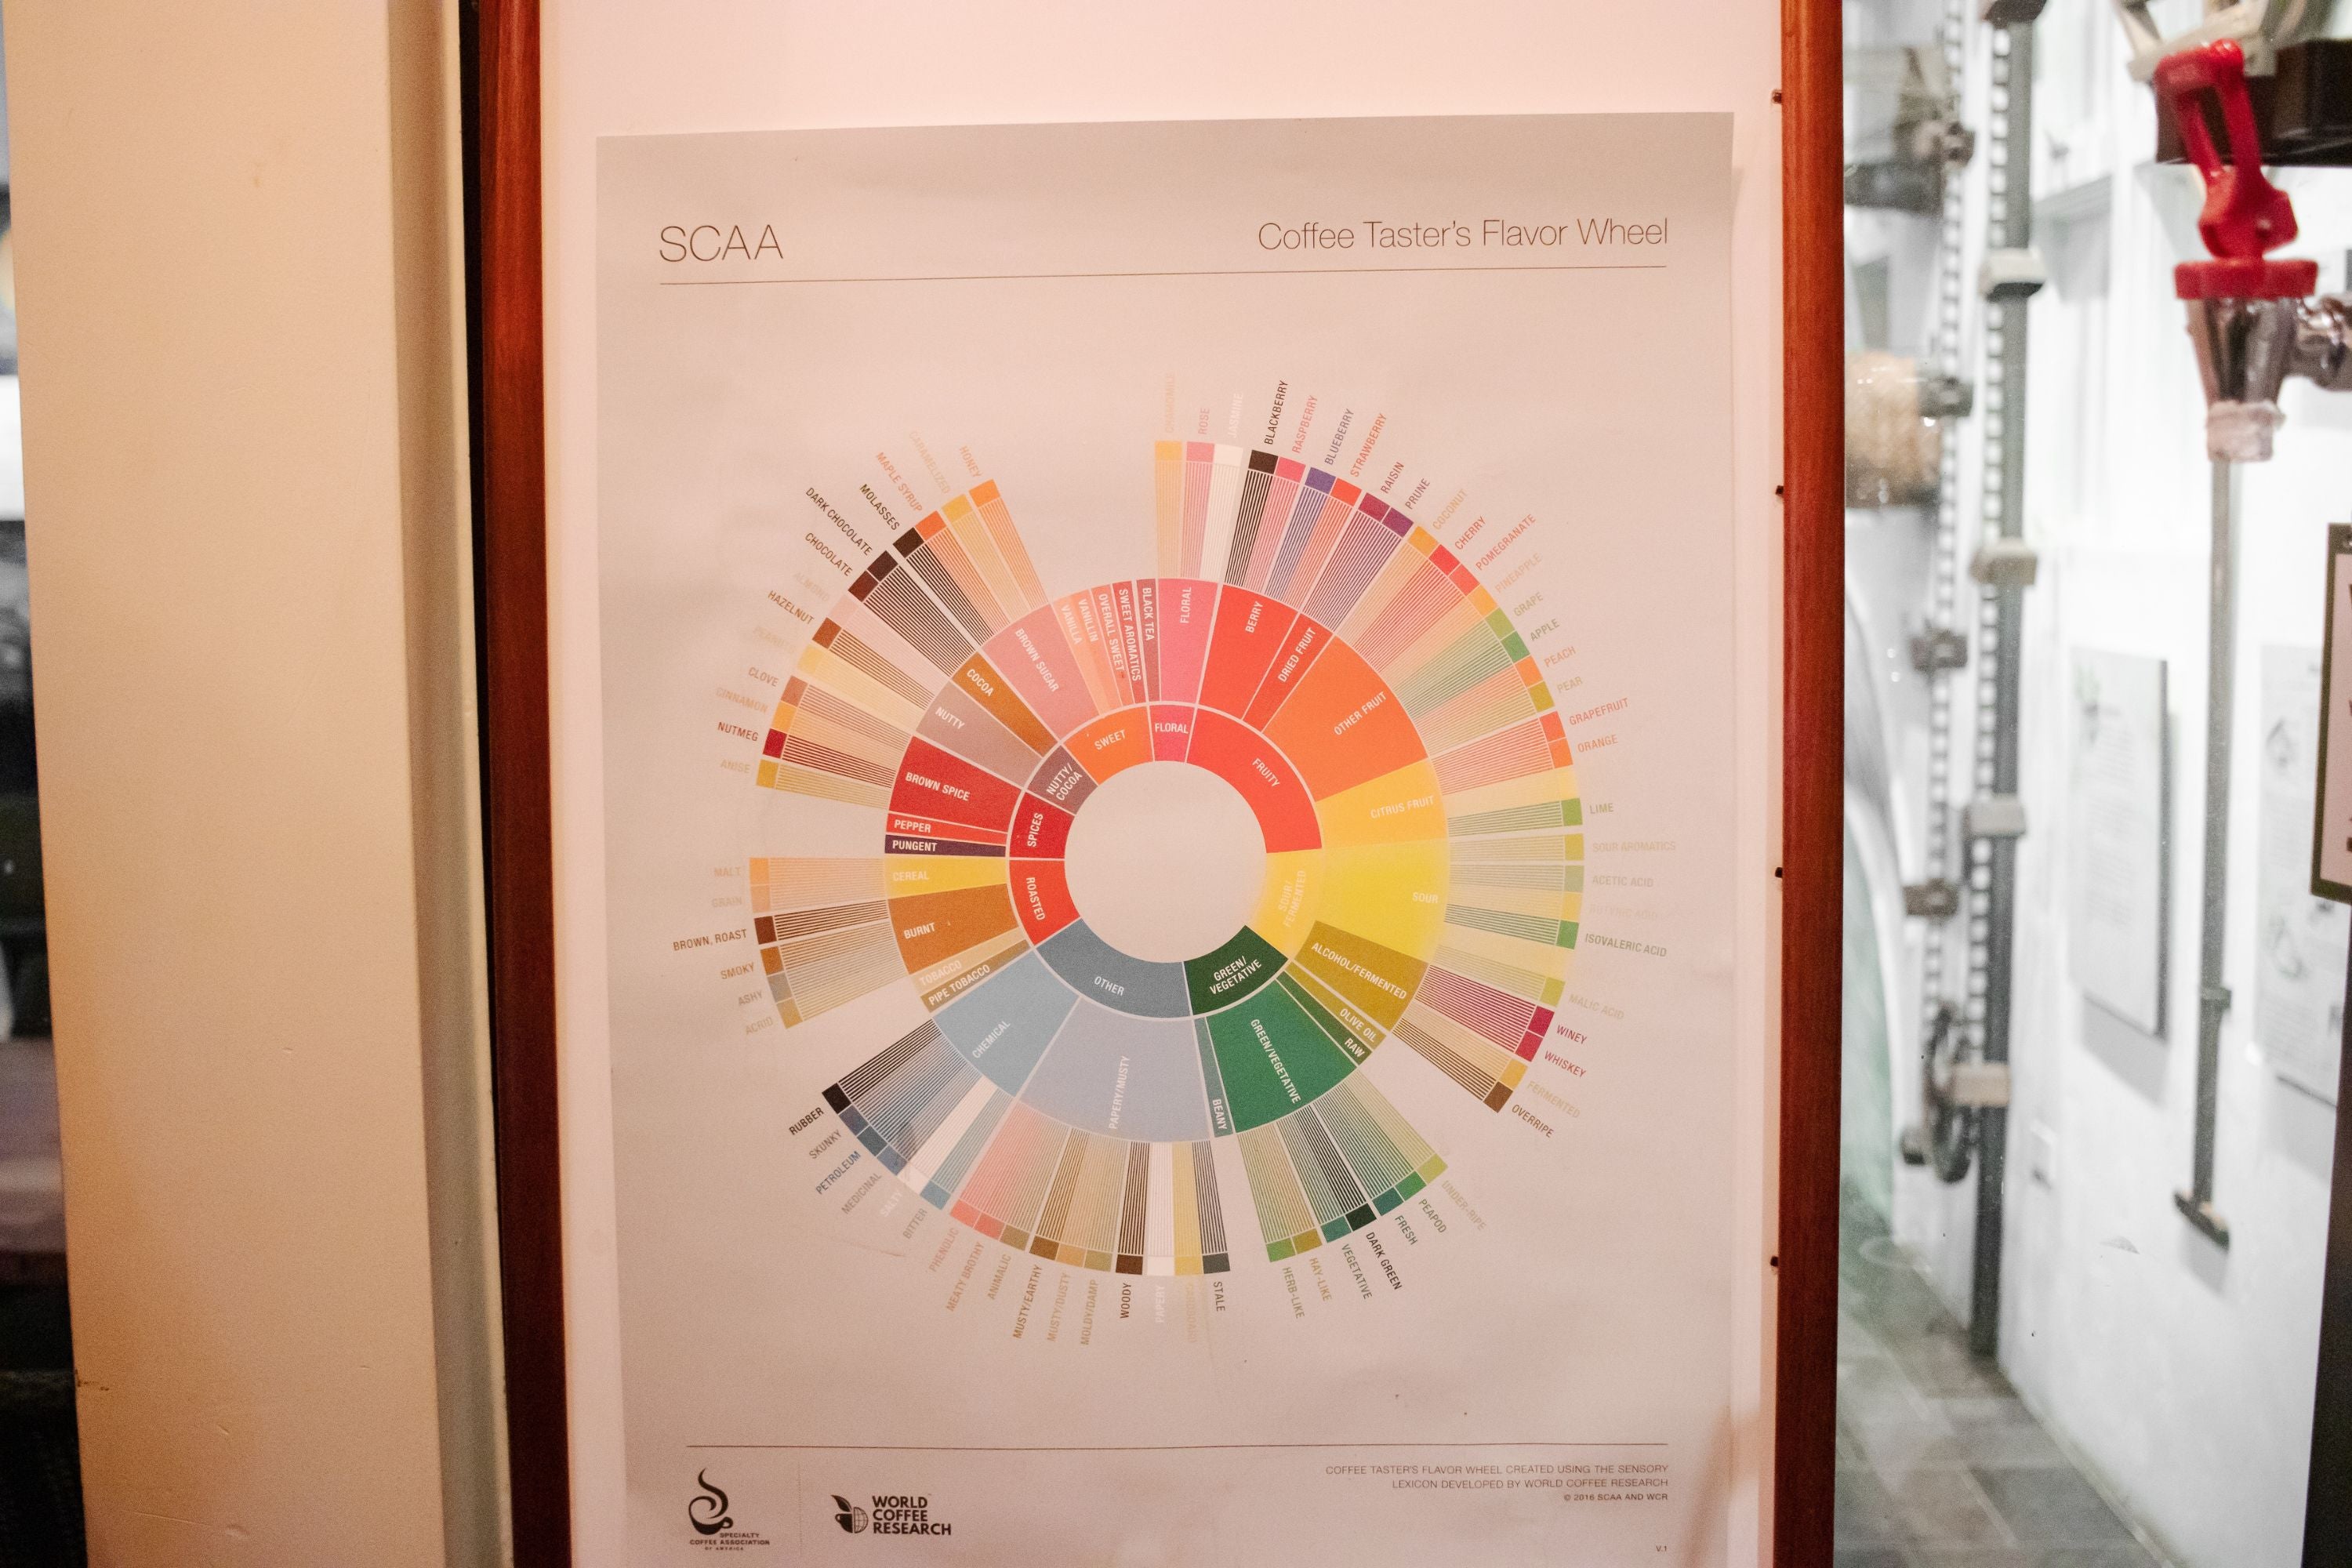 Coffee Taster's Flavor Wheel created by the Specialty Coffee Association of America